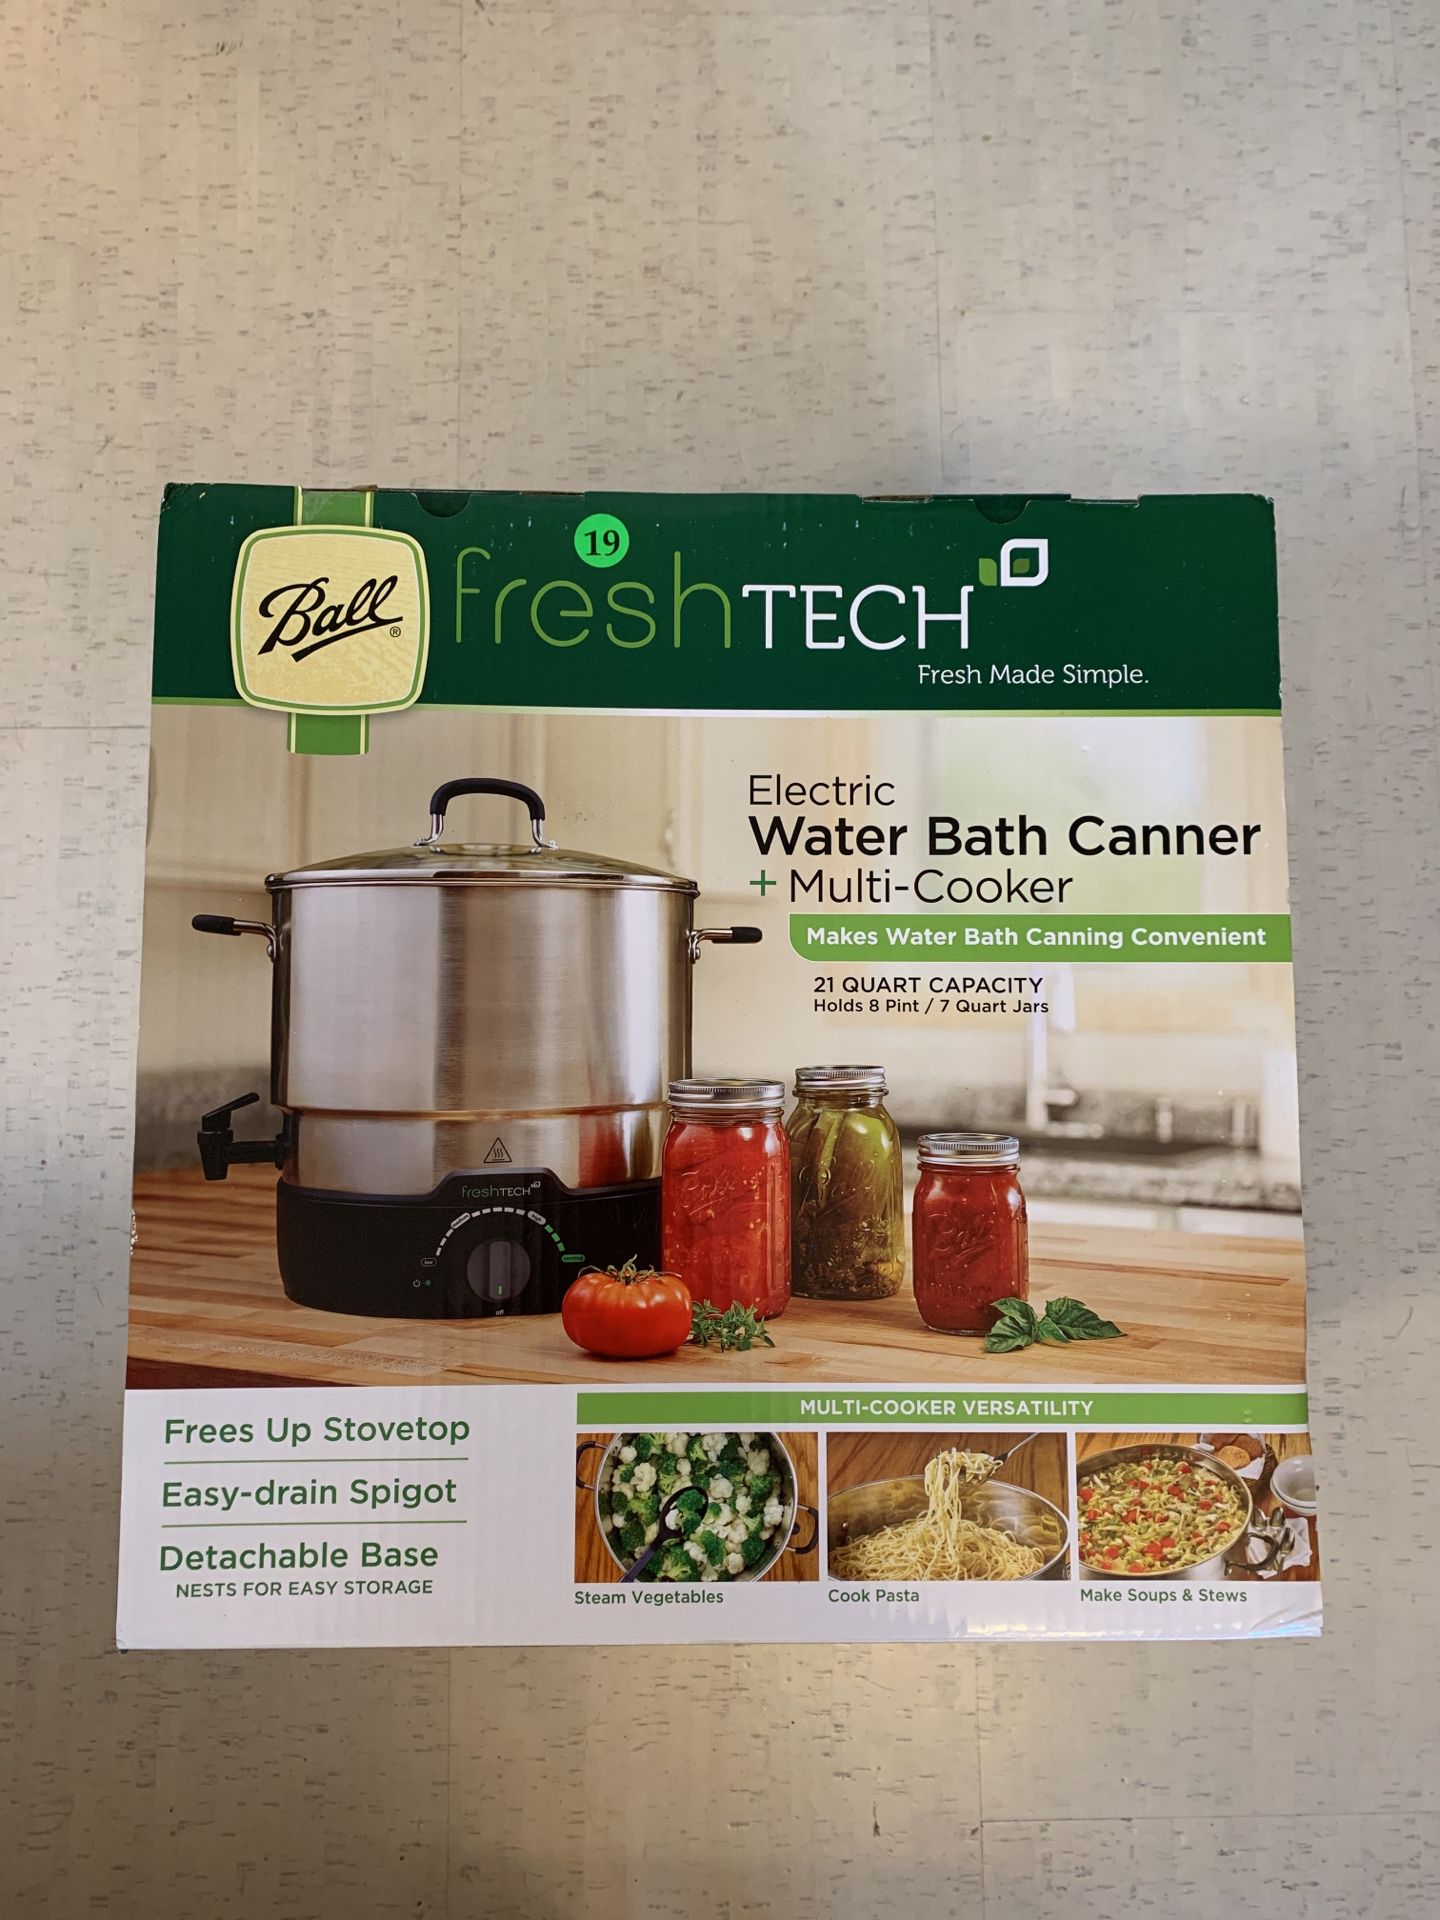 FreshTECH 21 qt Electric Water Bath Canner & Multicooker by Ball